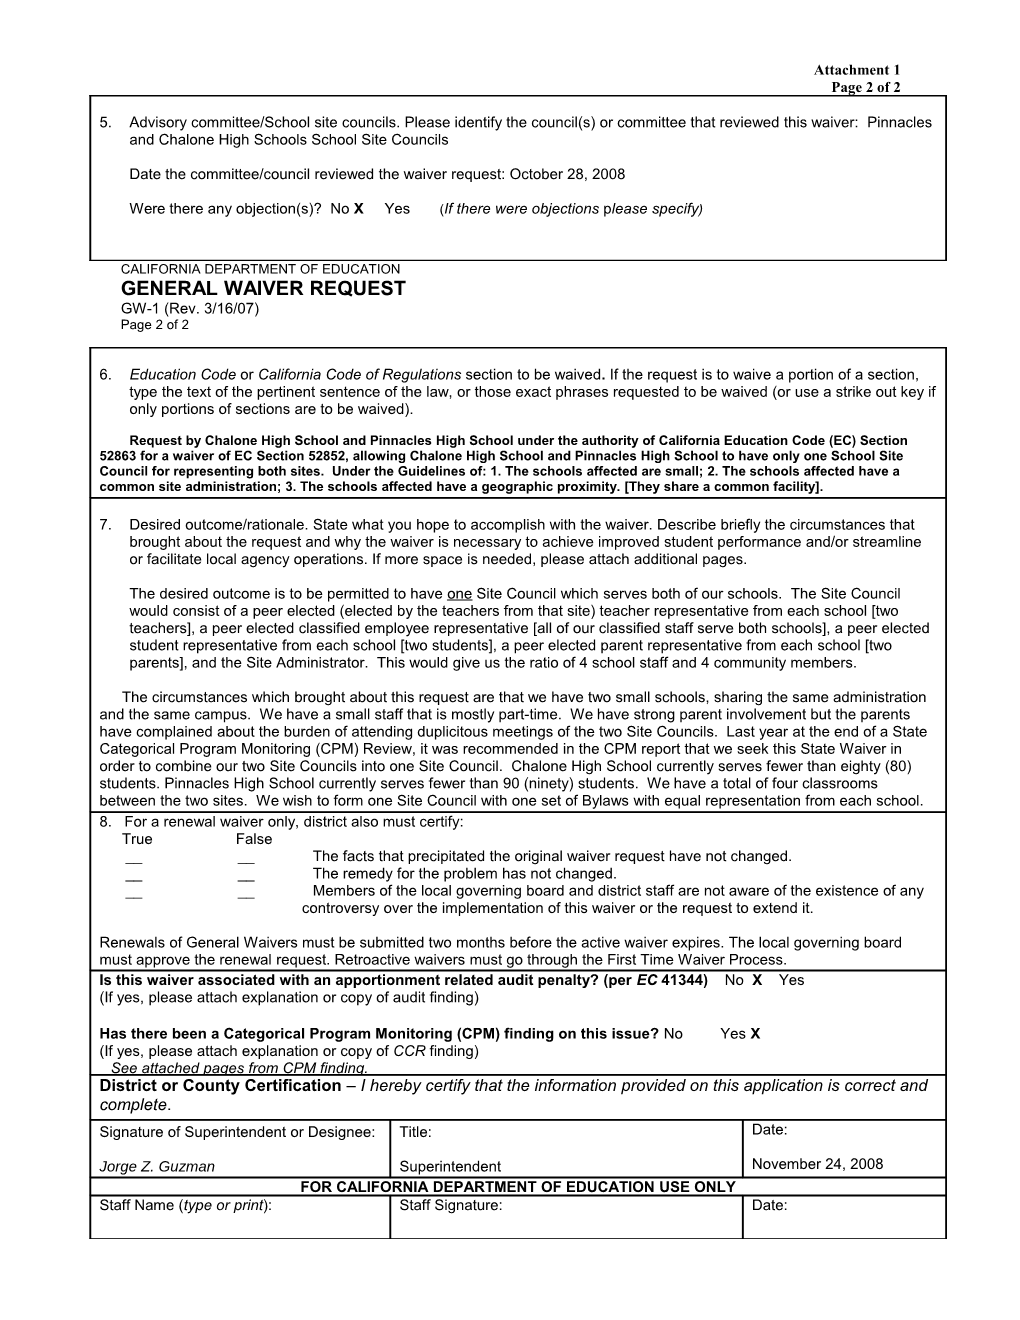 July 2009 Waiver Item W53 Attachment 1 - Meeting Agendas (CA State Board of Education)